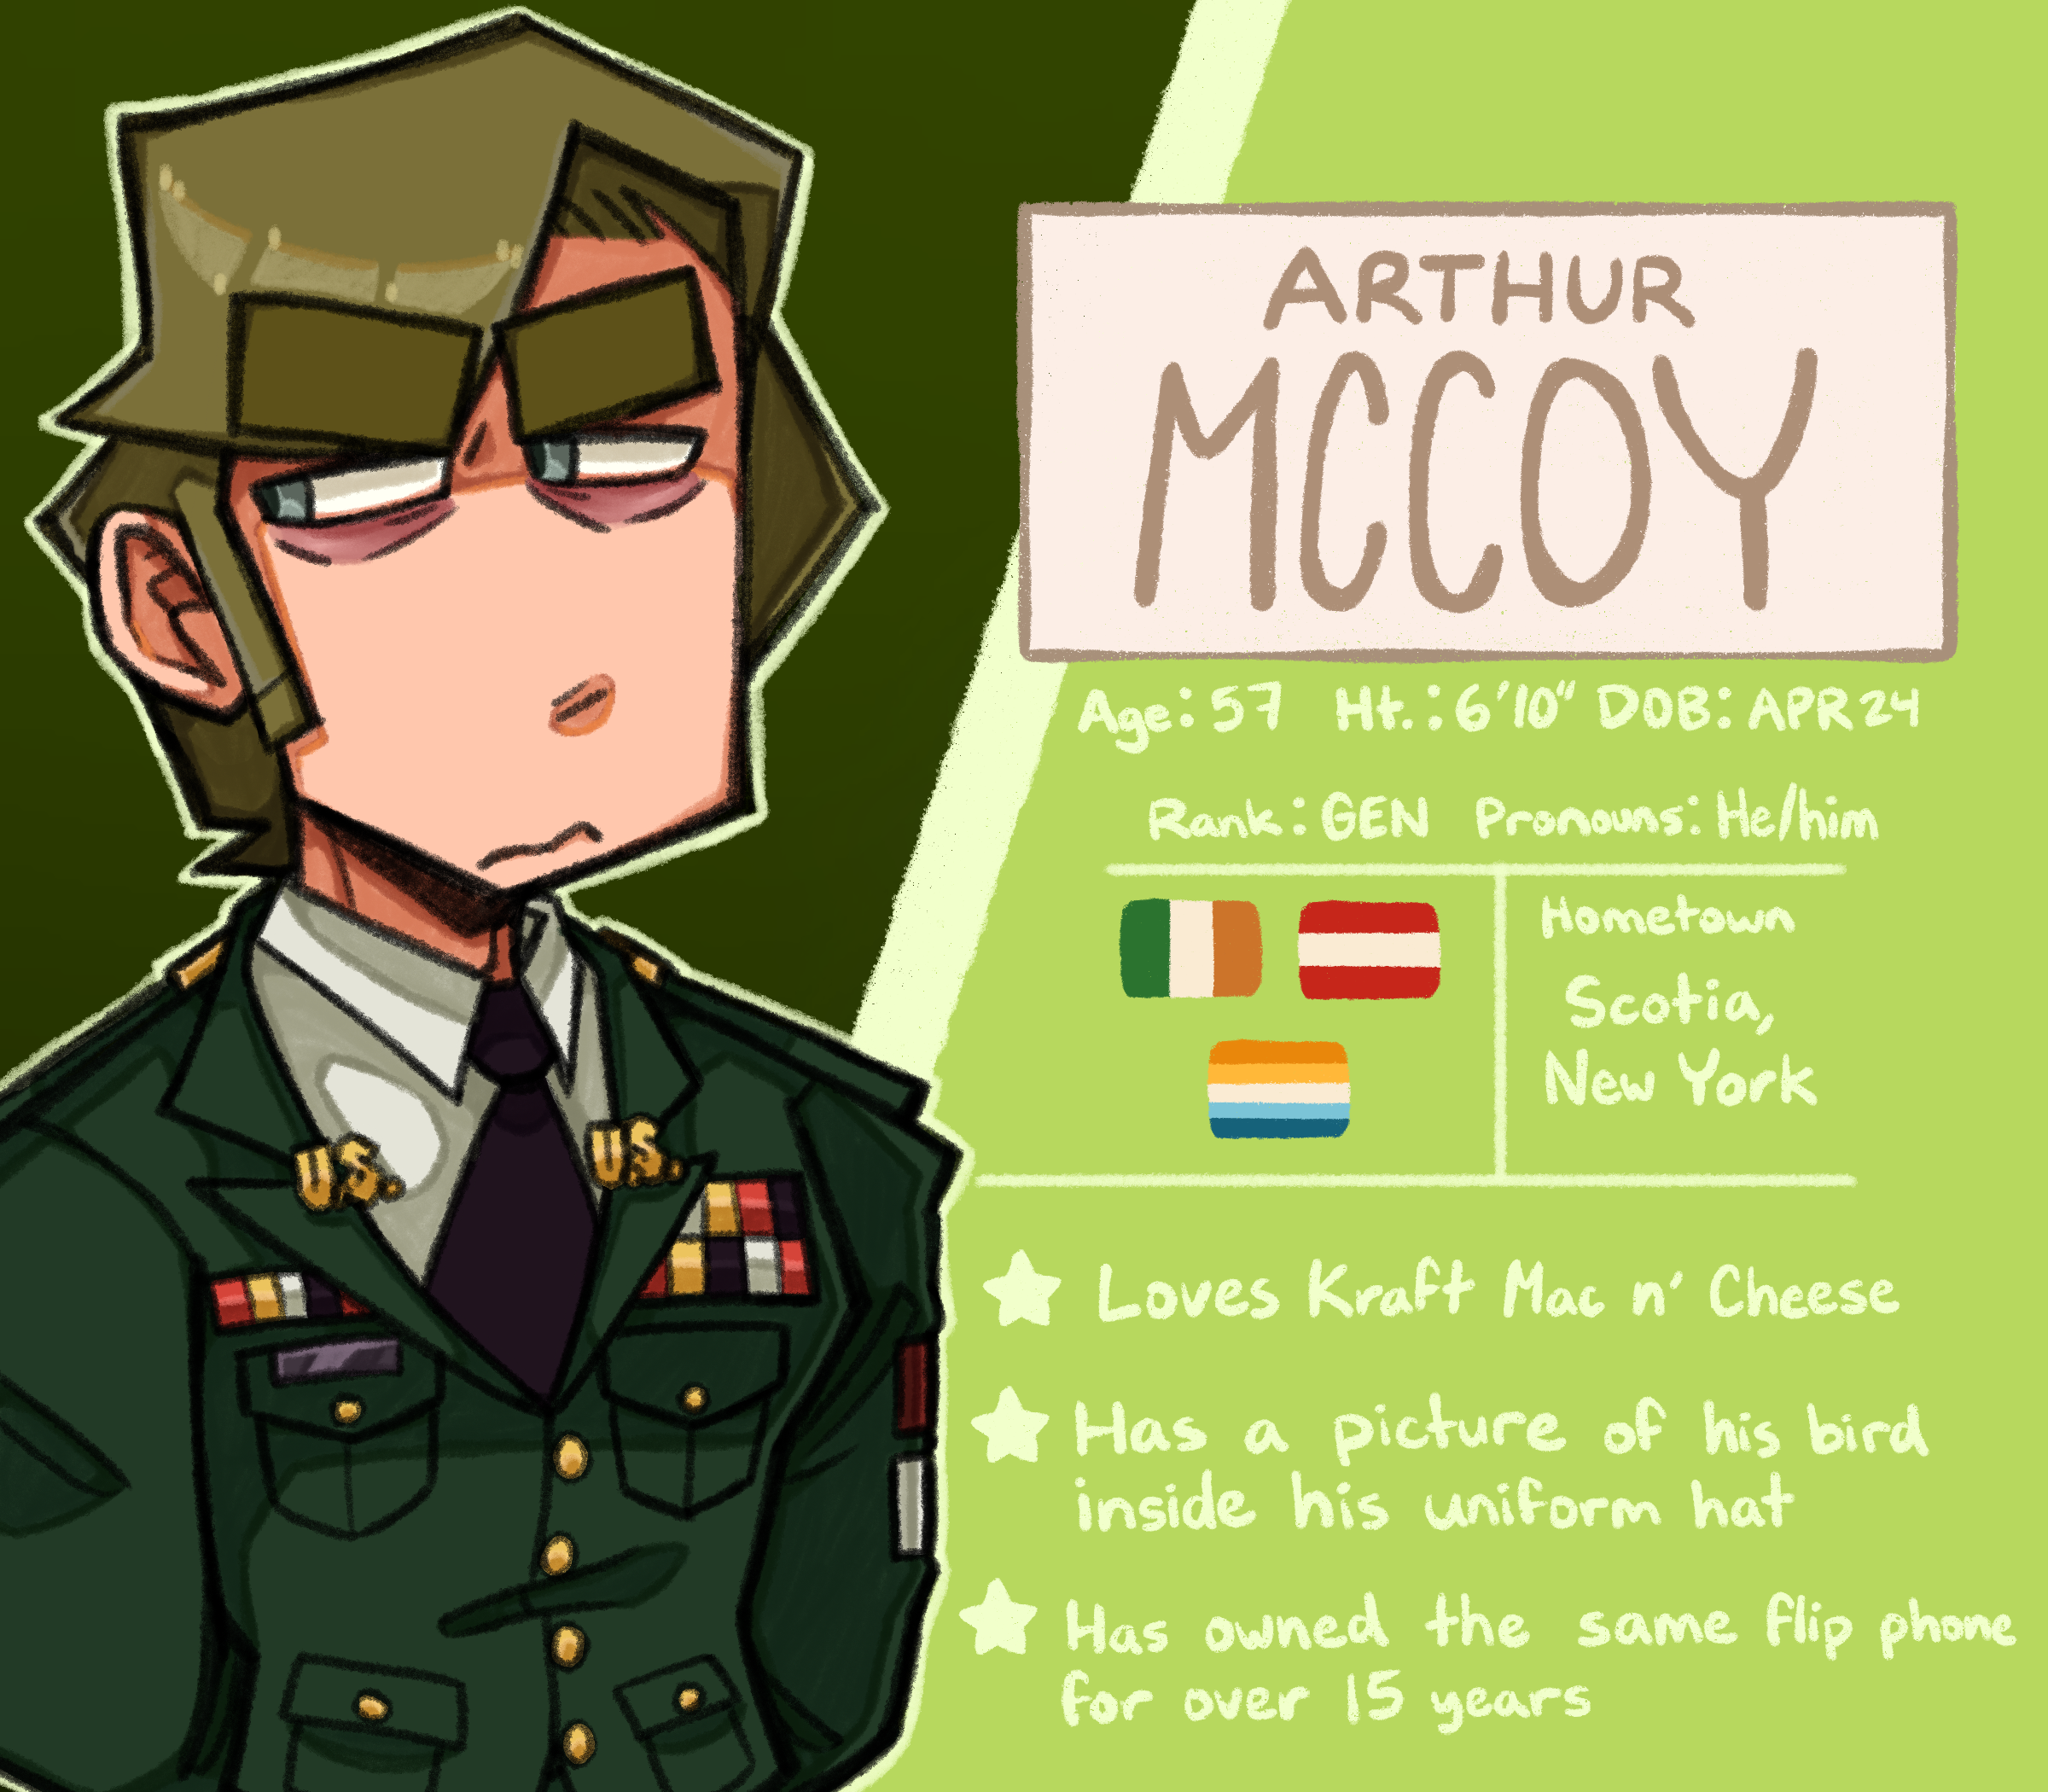 A character bio for Arthur McCoy. Age: 57, Height: 6'10, Date of Birth: April 24th. Rank: General, Pronouns: He/him. McCoy is of Irish-Austrian descent, and is cisgender and aromantic-asexual. His hometown is Scotia, New York. Fun facts include: he loves Kraft Mac n' Cheese, he has a picture of his bird inside his uniform hat, and he has owned the same flip phone for over 15 years.